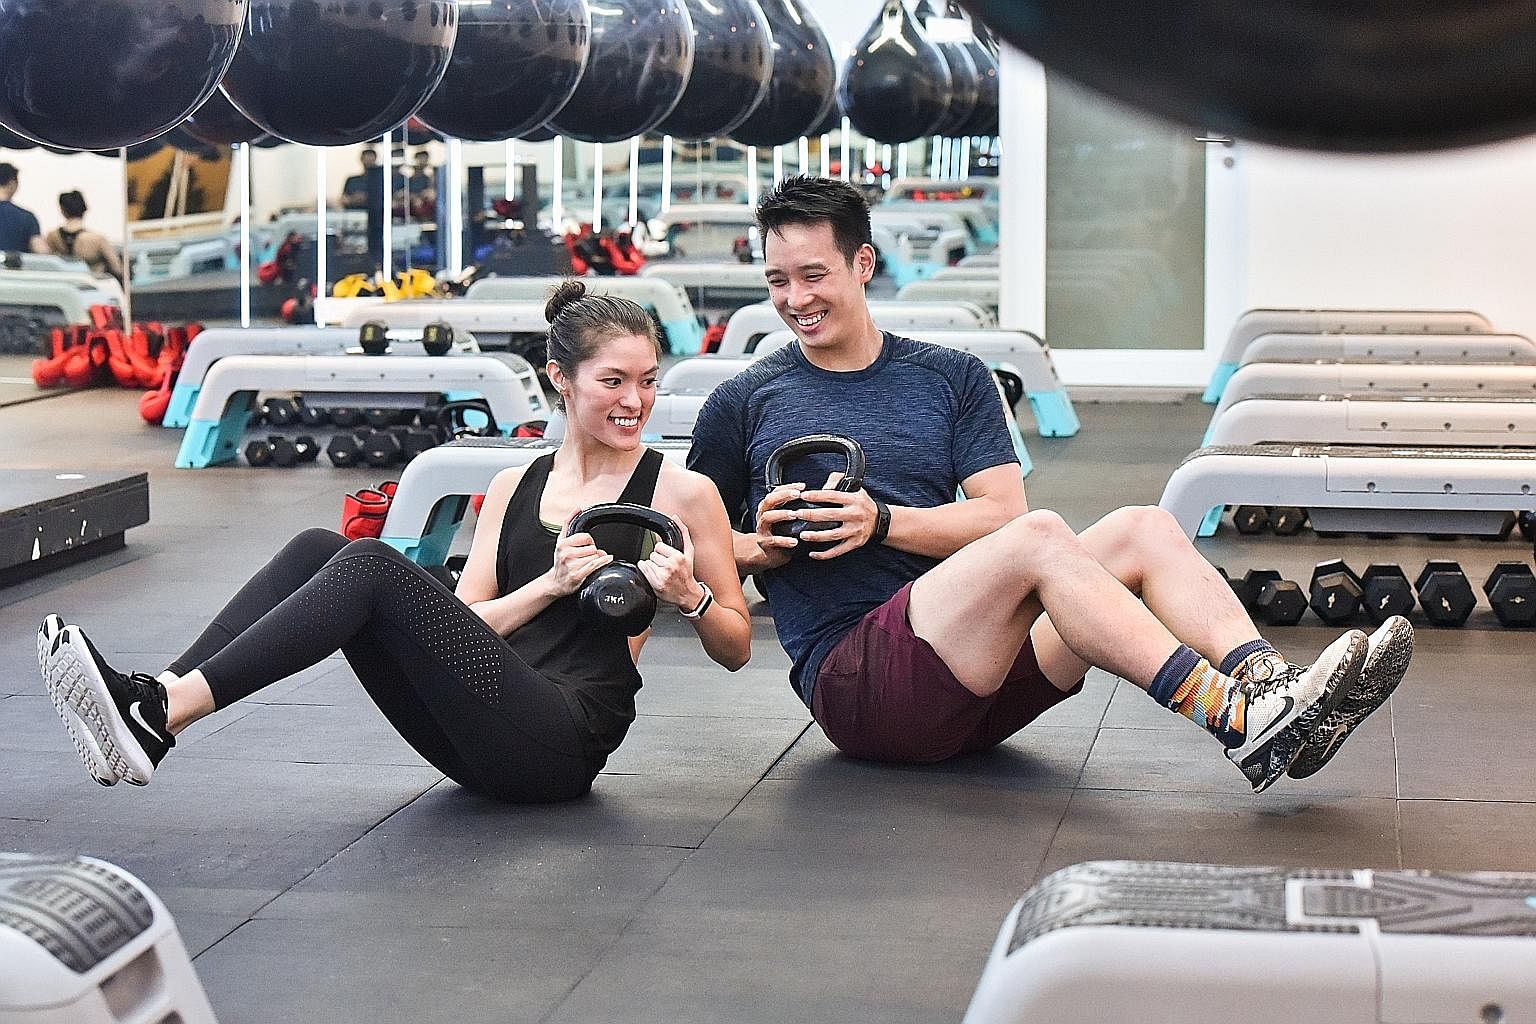 Ms Victoria Martin-Tay has a master's degree from Harvard University, but she quit the engineering field to start fitness and boxing studio bo0m with her husband Bryan Tay, a Princeton University graduate and former Singapore national swimmer, in Feb